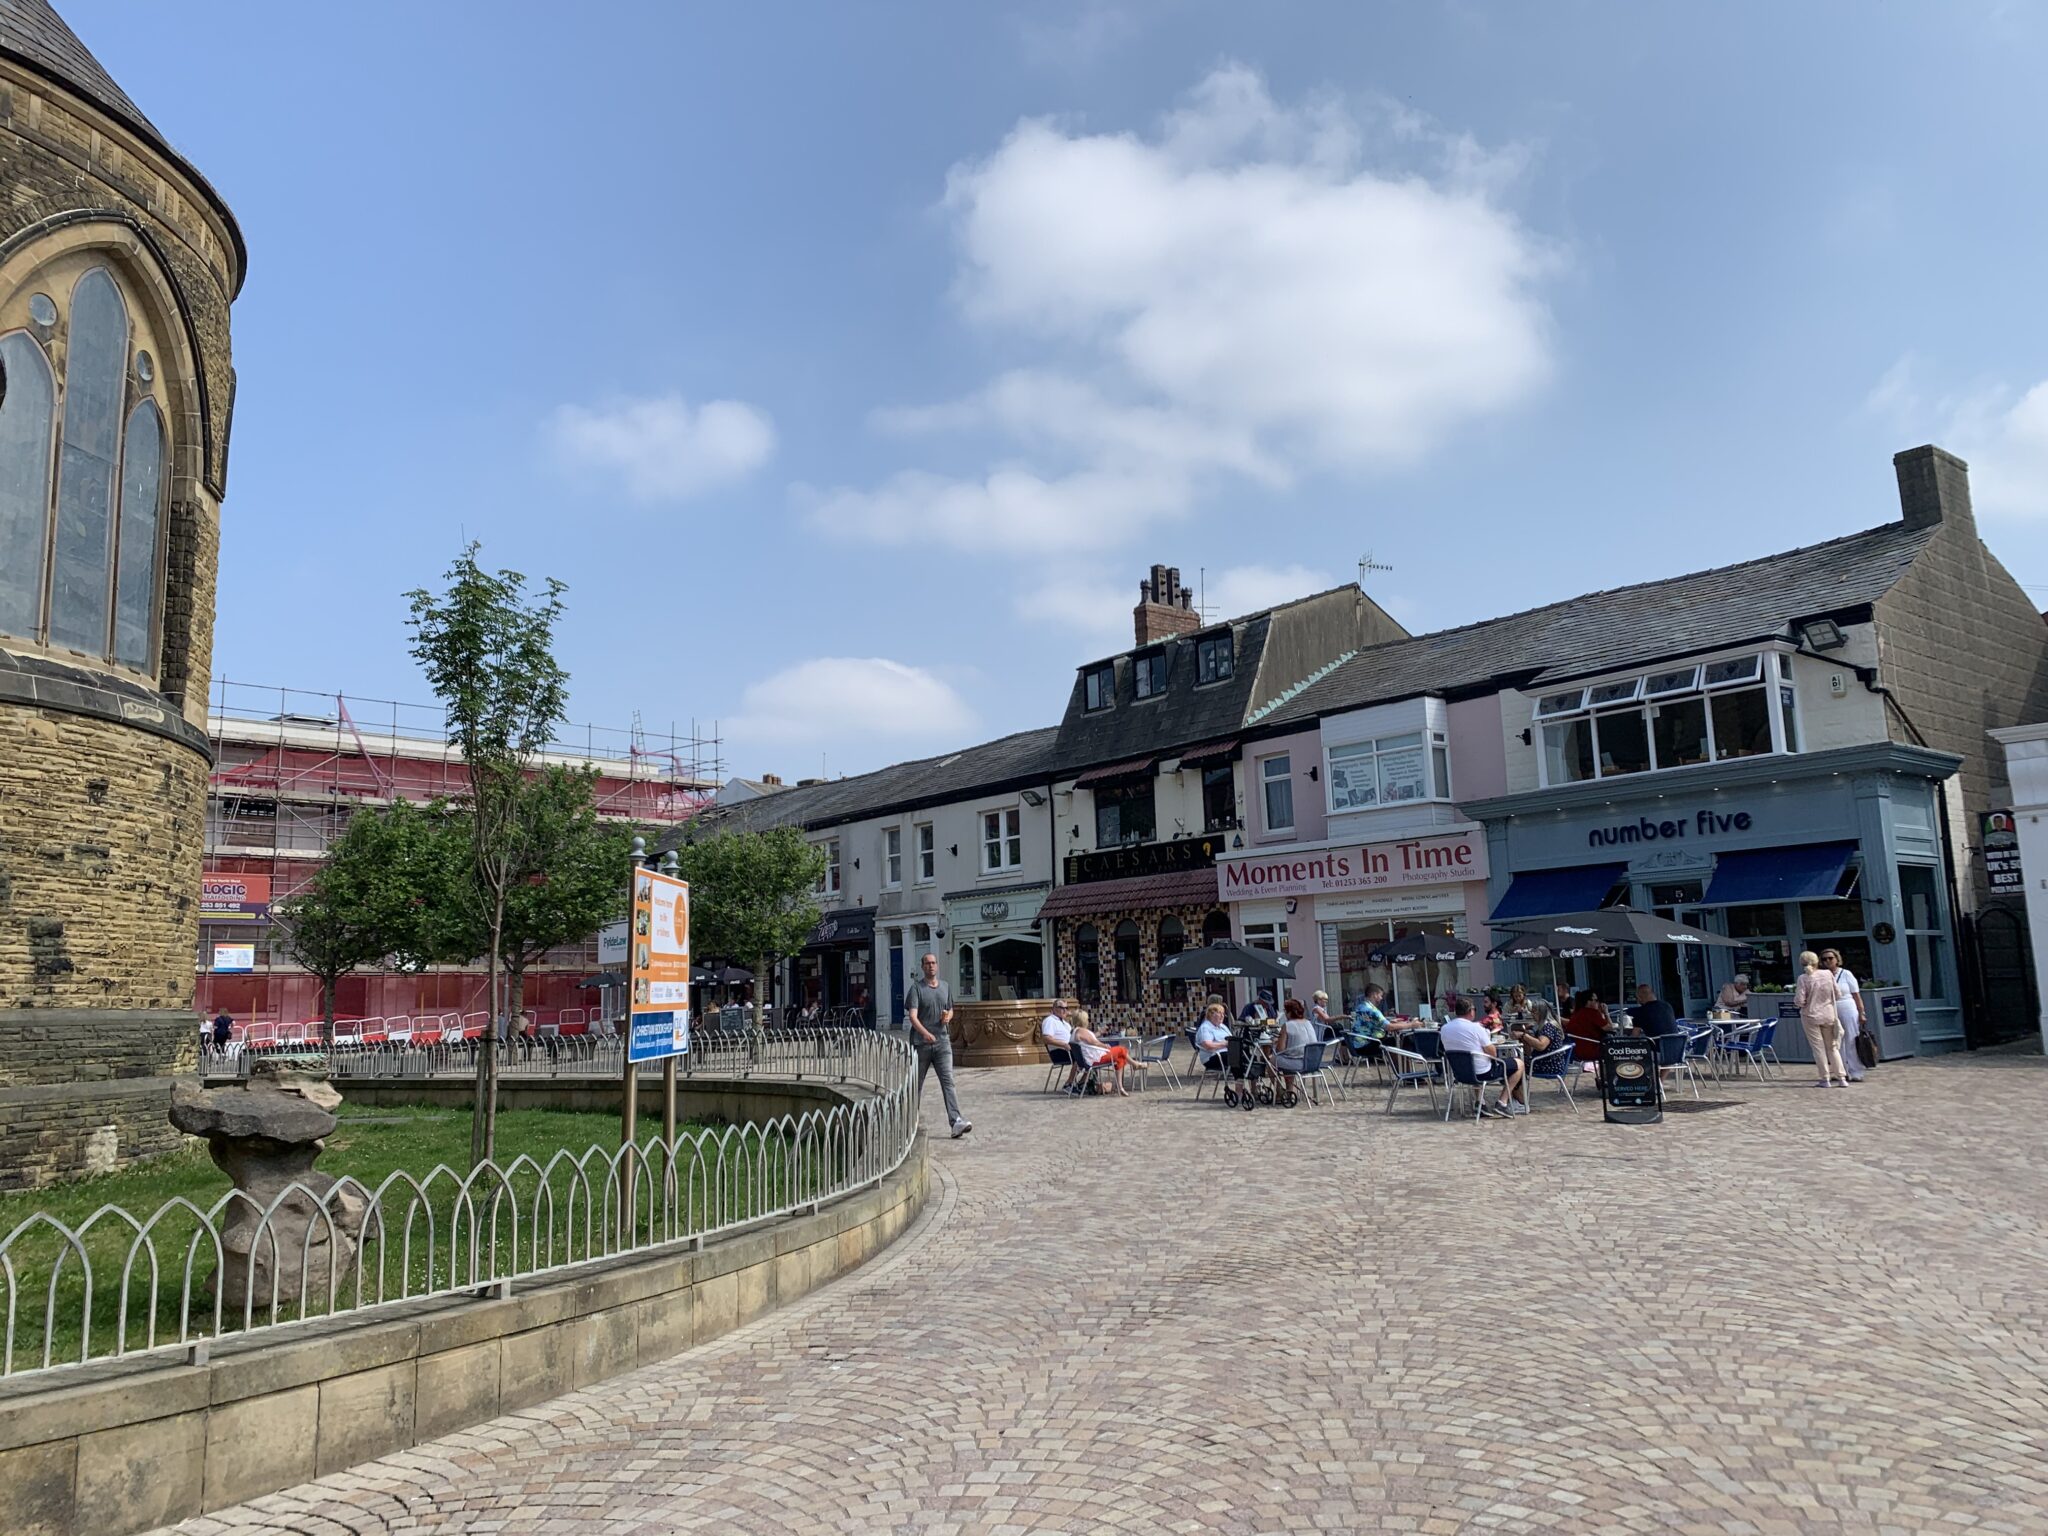 Cedar Square, with St John's Church just visible at the left and Cedar Tavern in the background